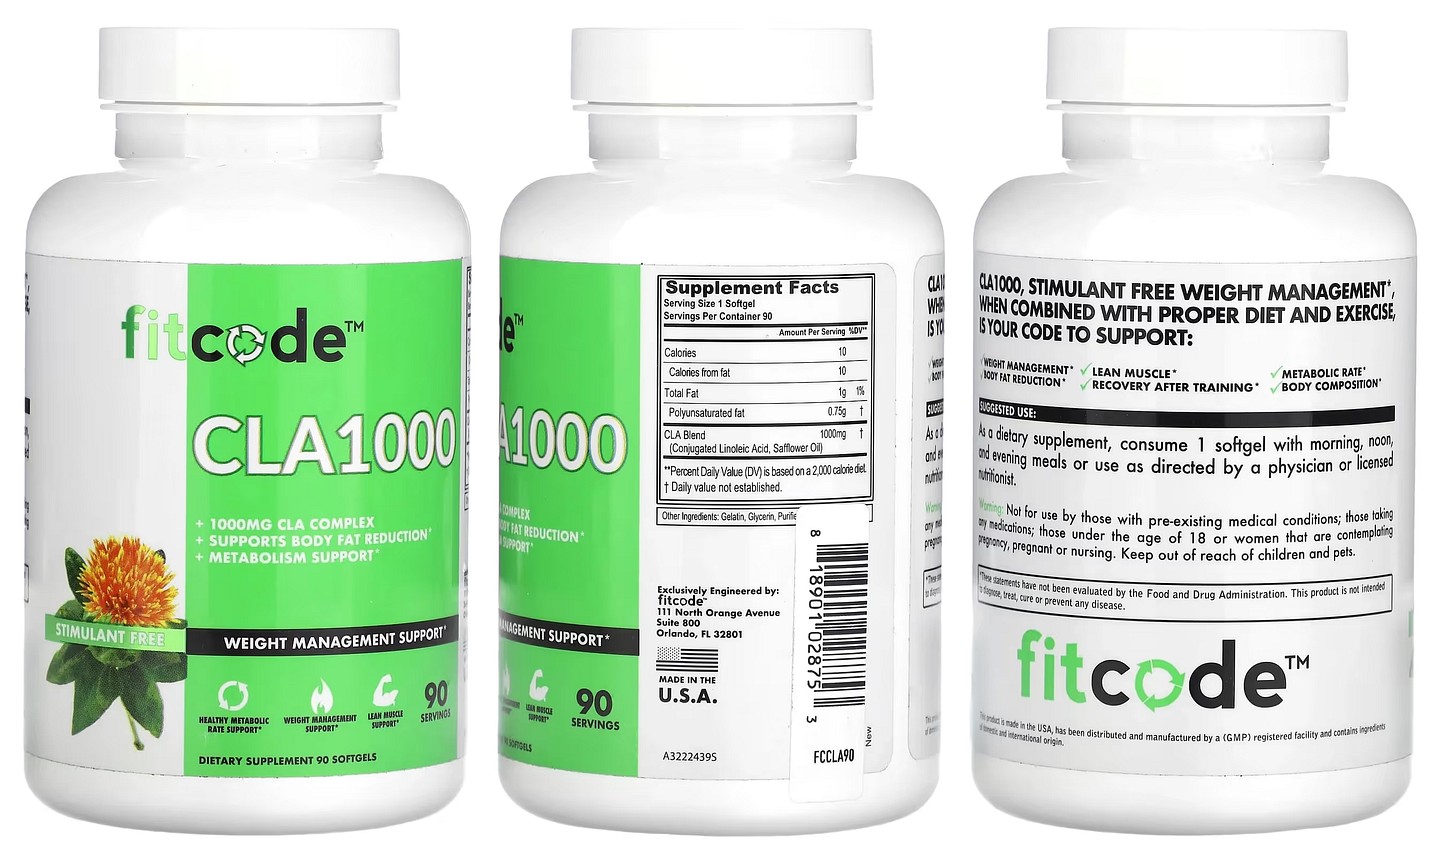 fitcode, CLA1000 packaging